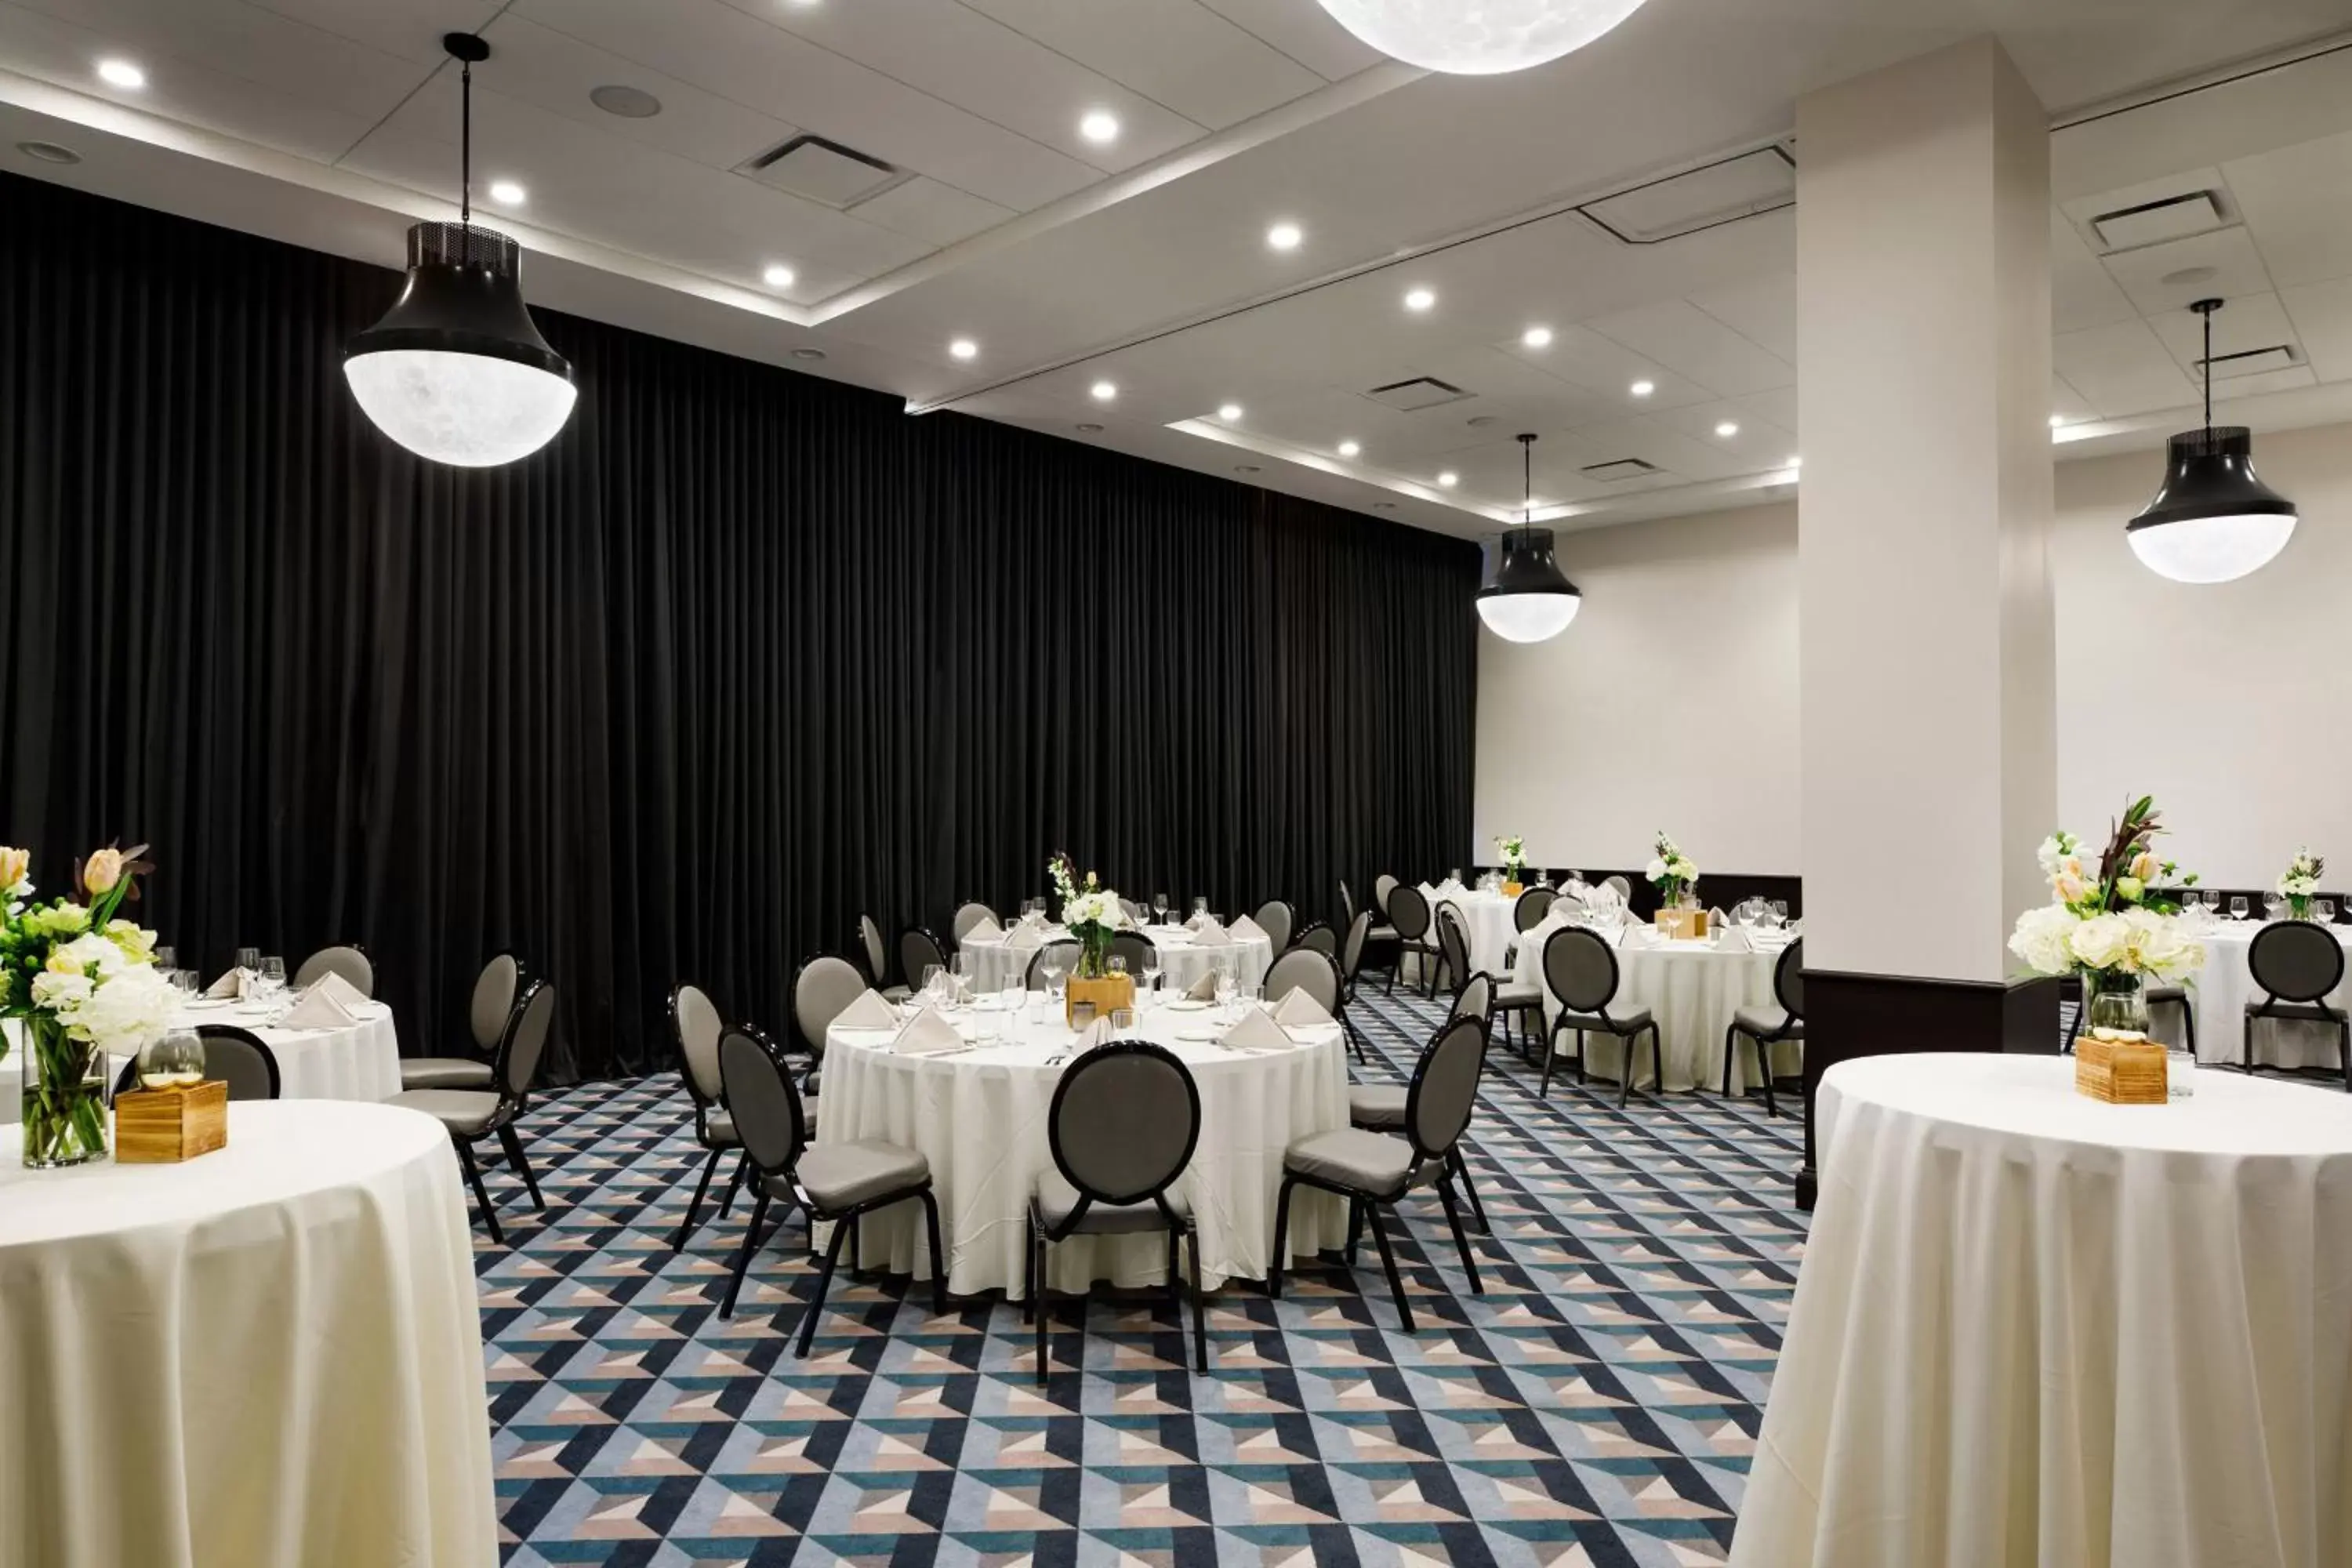 Meeting/conference room, Banquet Facilities in Cyrus Hotel, Topeka, a Tribute Portfolio Hotel